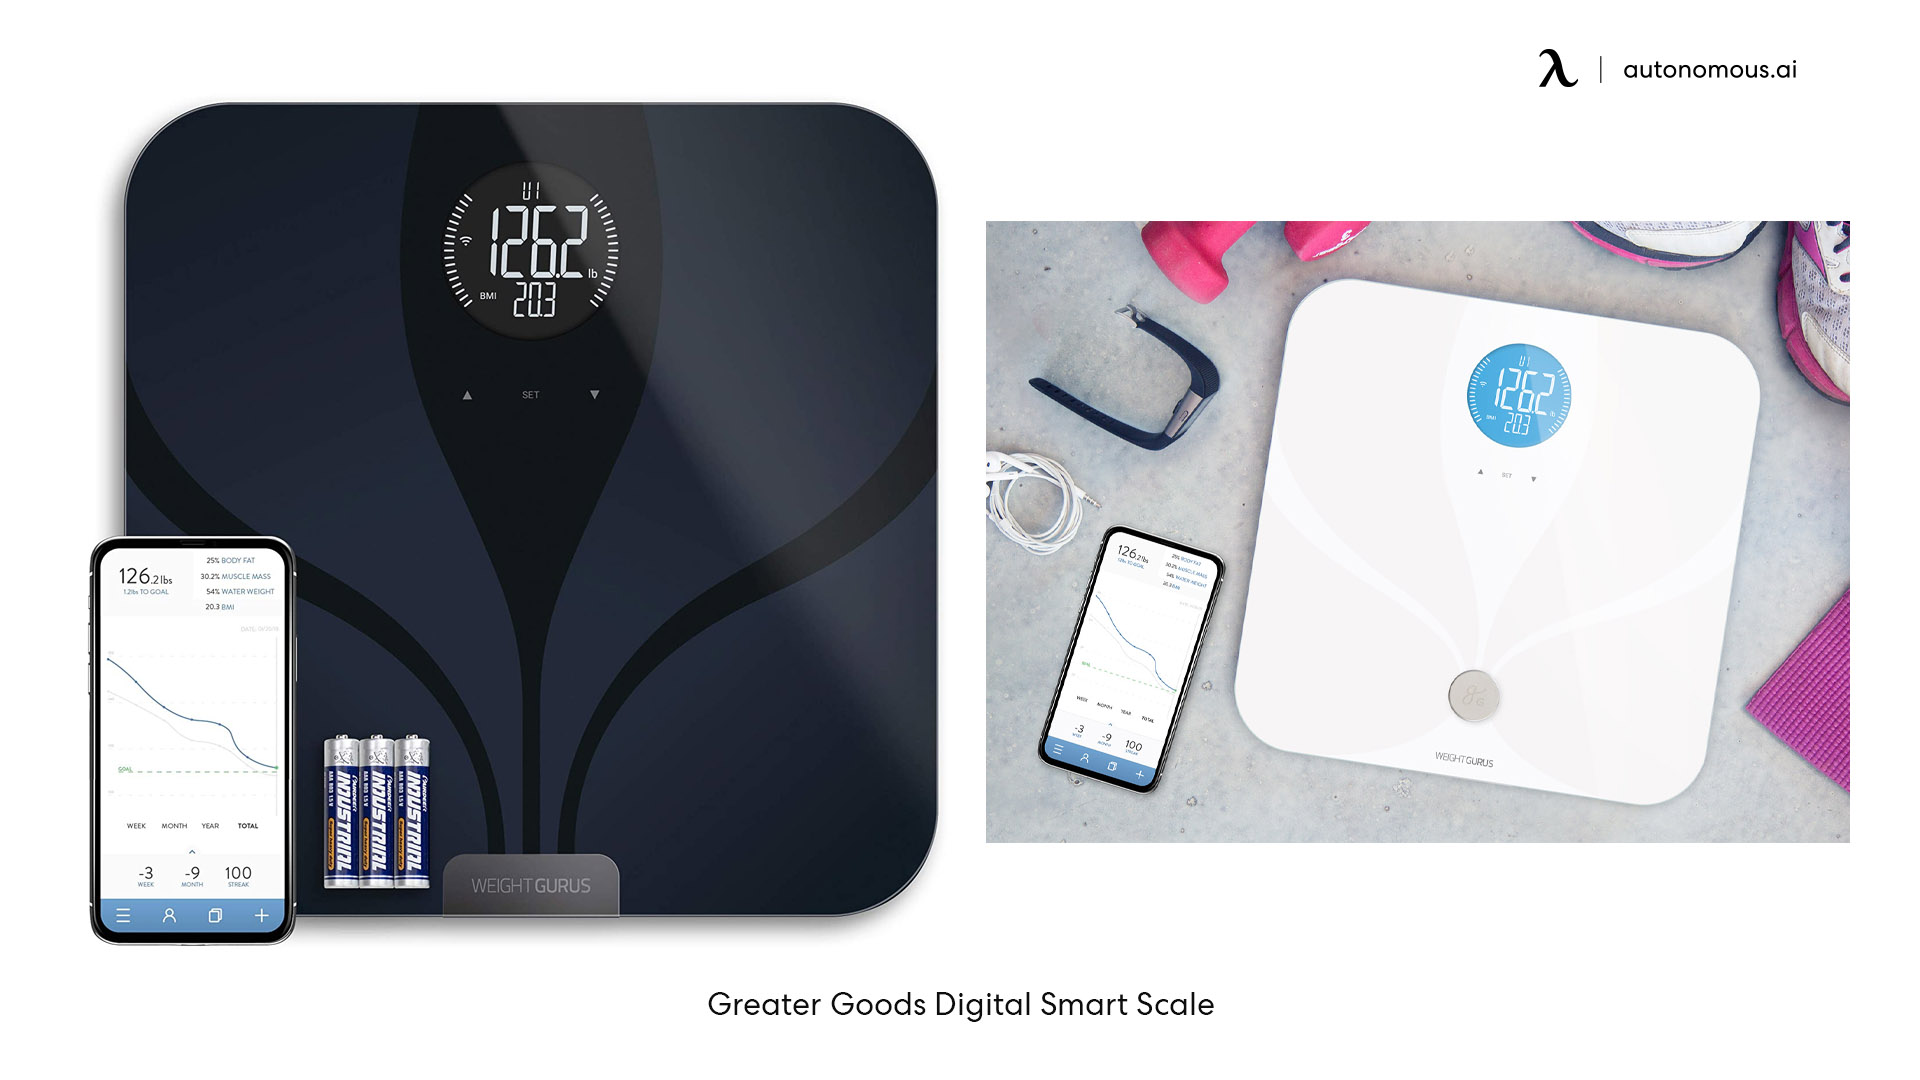 Greater Goods Digital Smart Scale